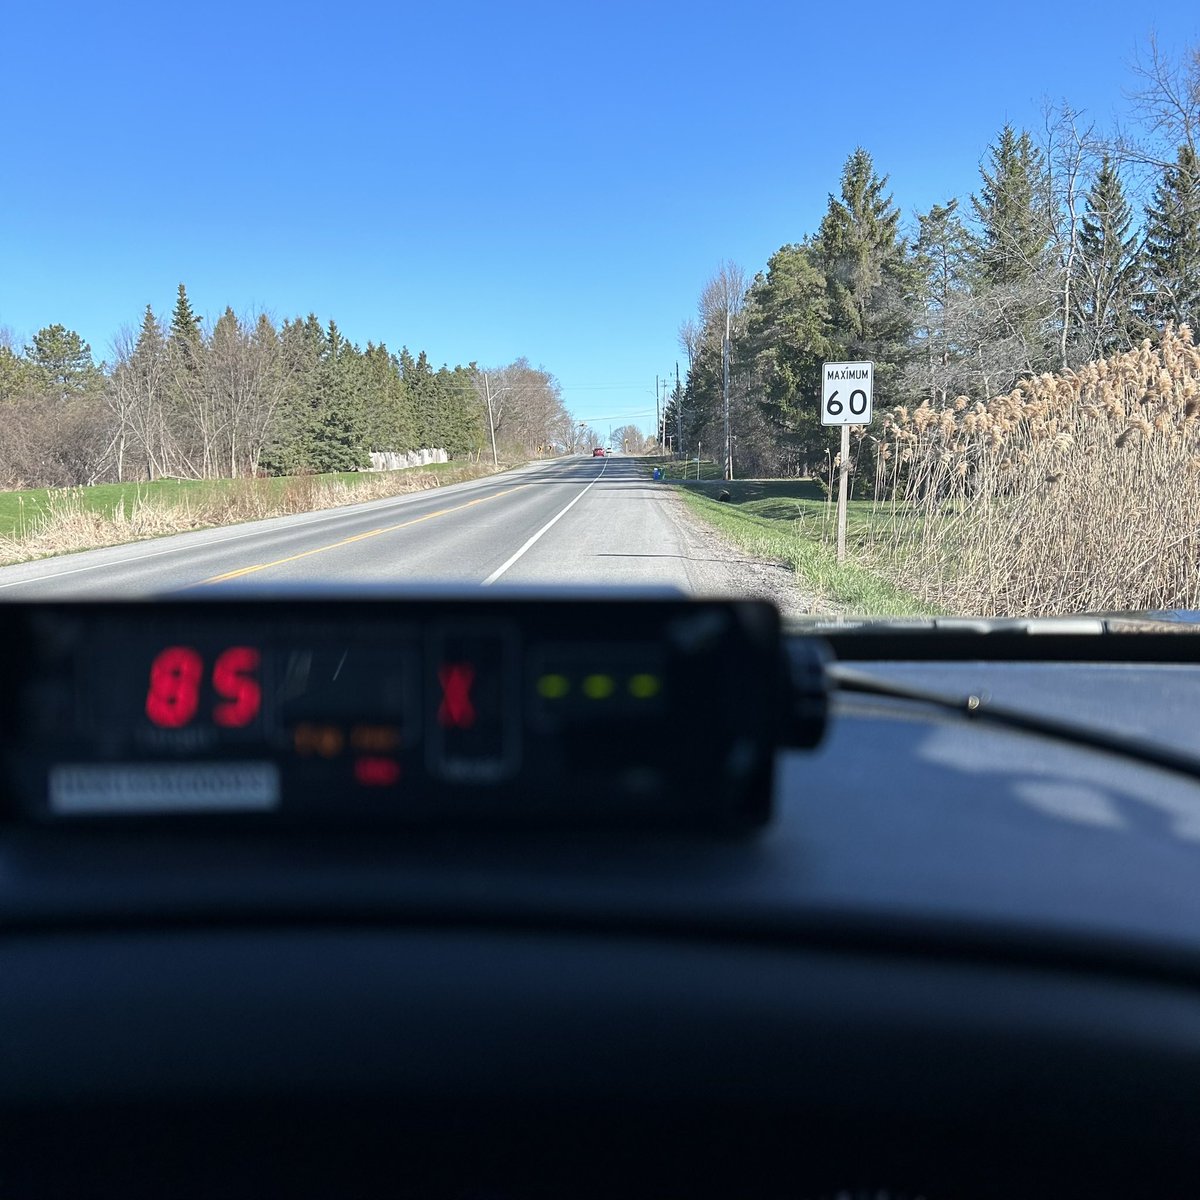 North division traffic conducted speed enforcement in #portperry #scugog this morning. Please obey the speed limit. #durhamvisionzero #brock #uxbridge cg